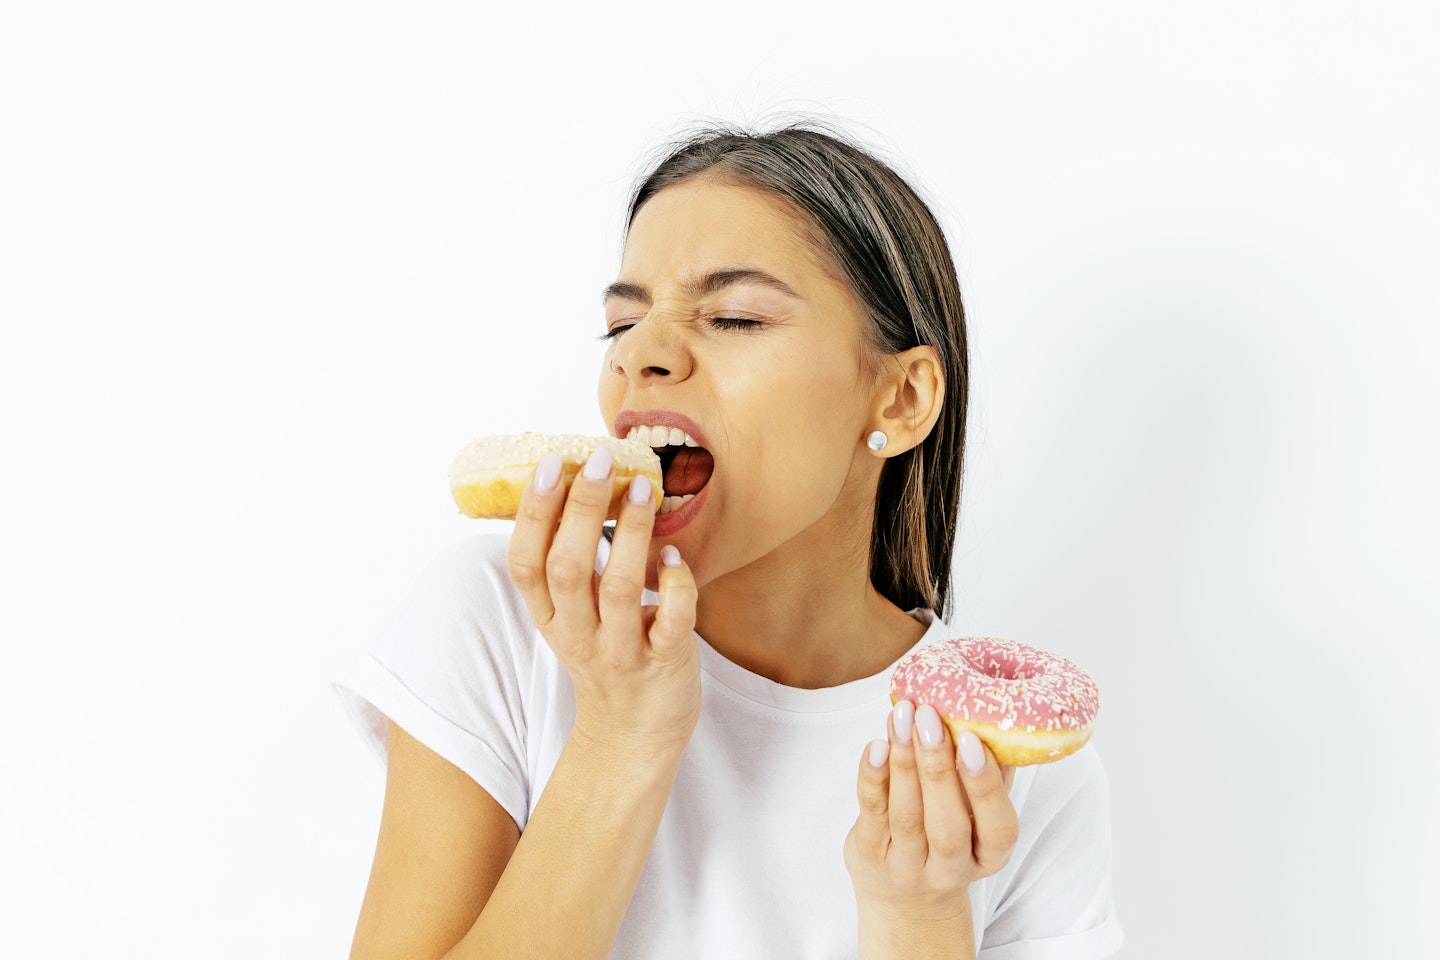 Secrets of your cravings